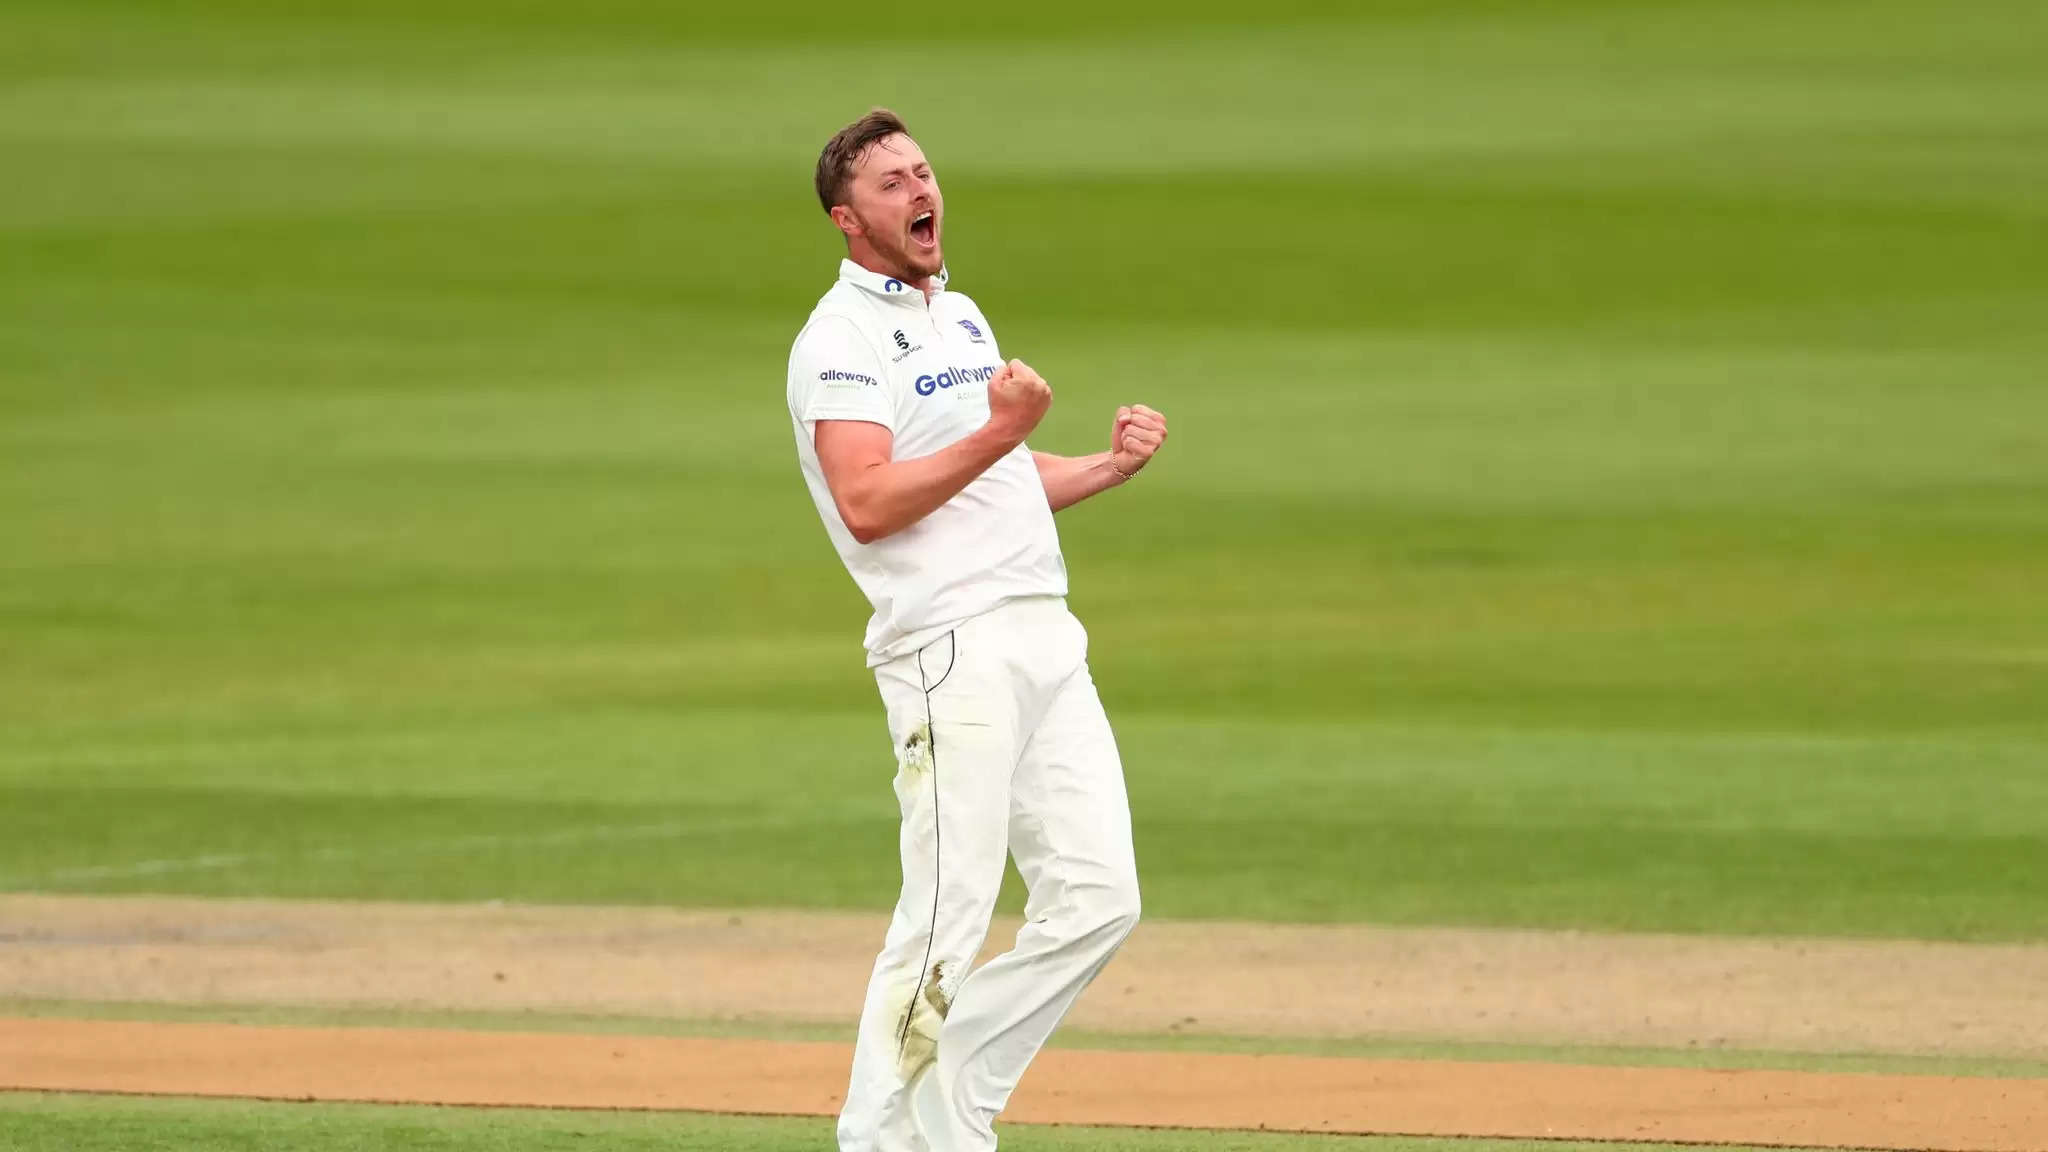 ENG vs NZ 1st Test: Ollie Robinson eyeing Kane Williamson’s wicket on potential Test debut